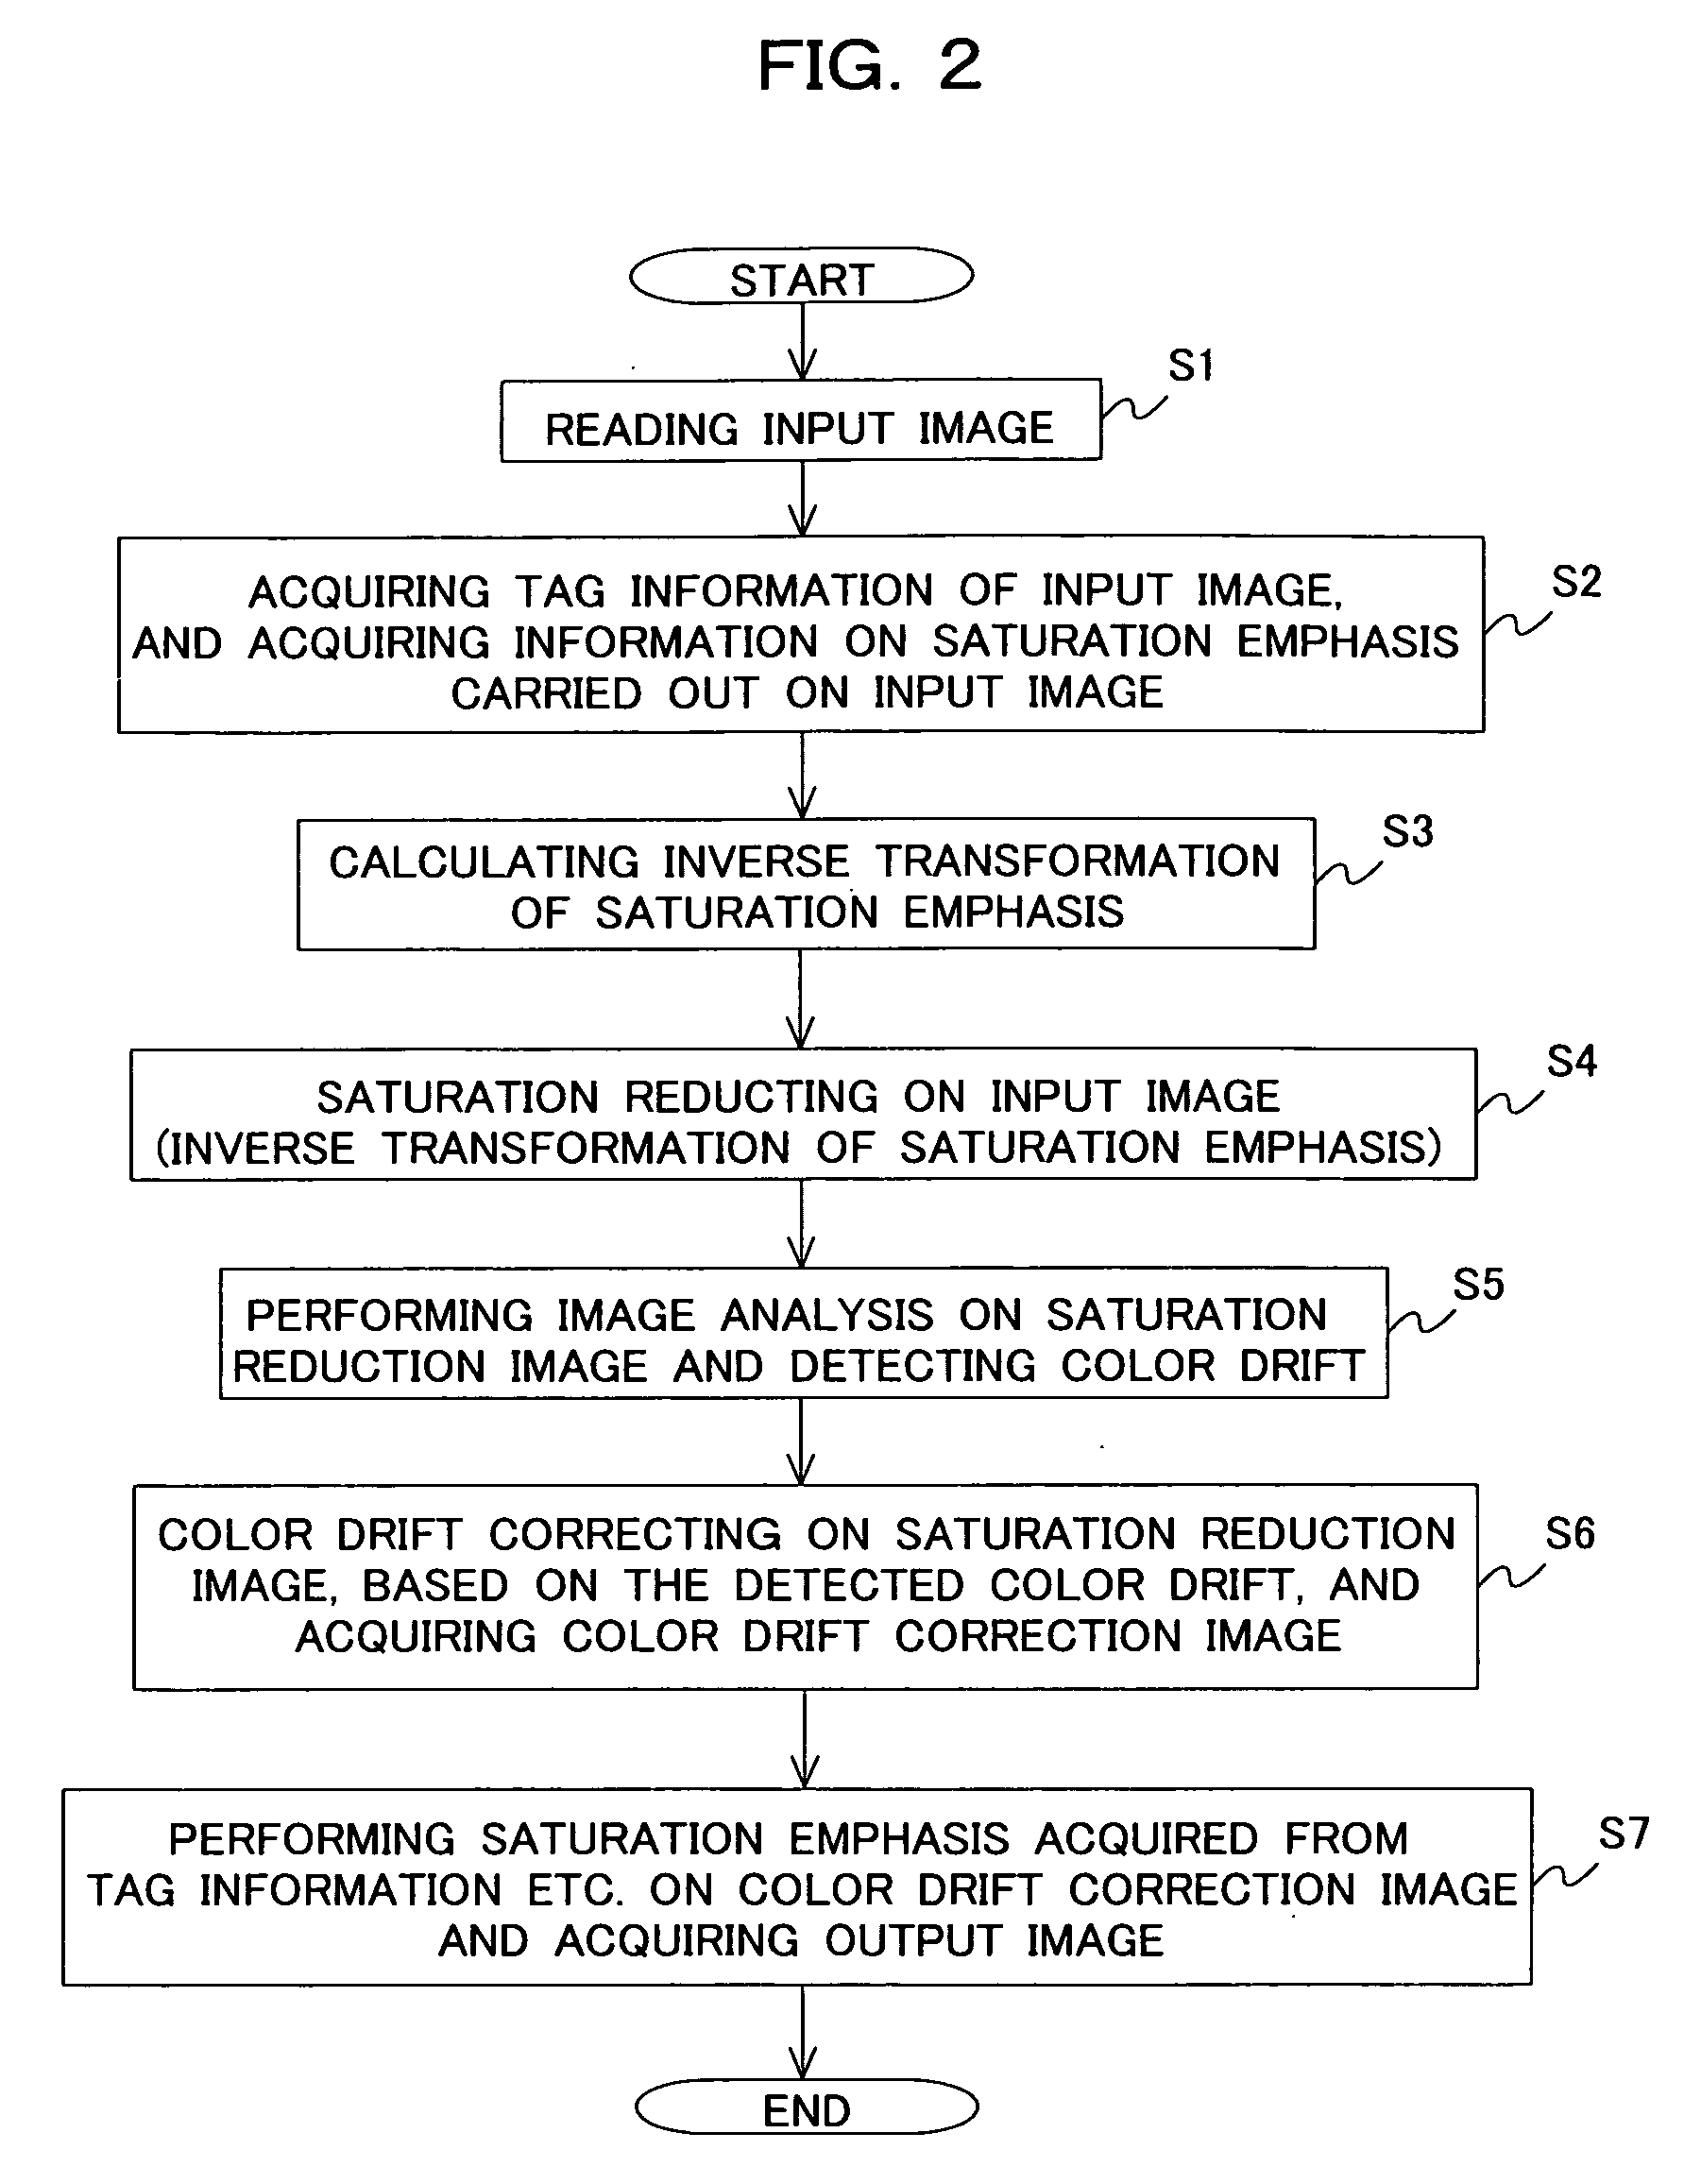 Image processing device for correcting image colors and image processing program